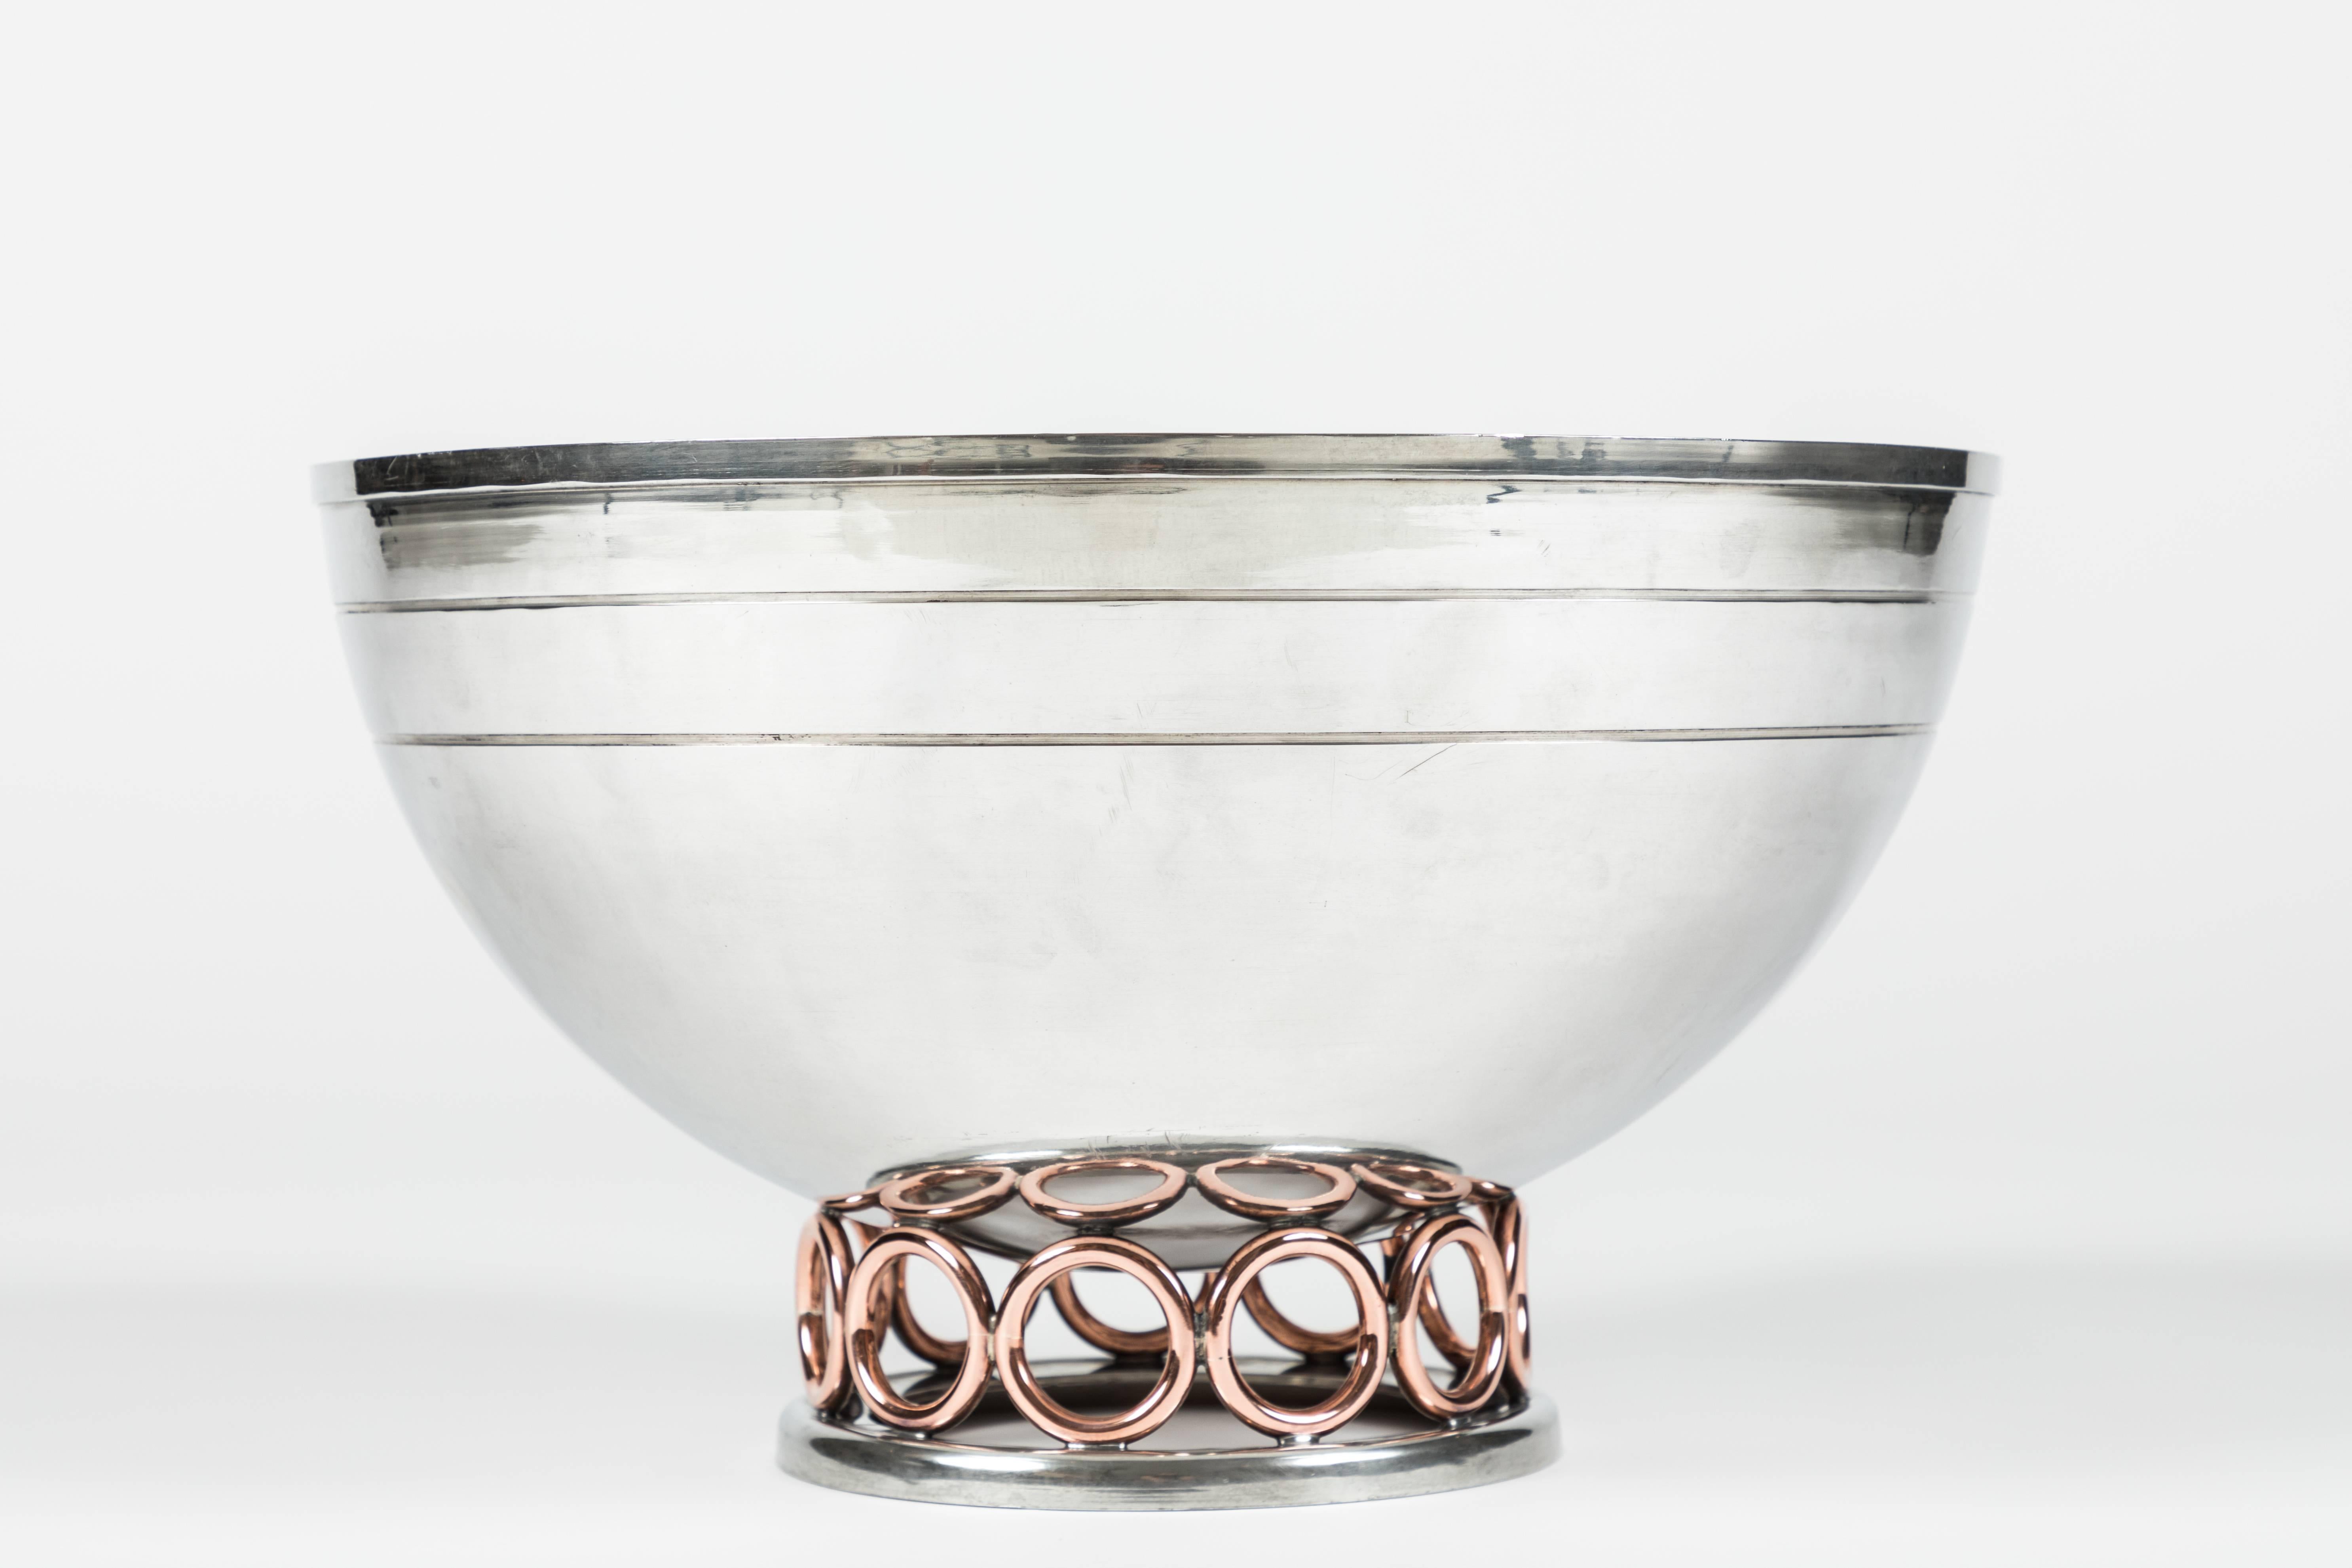 A large and beautiful bowl made by renowned California metal smith Porter Blanchard. Blanchard learned the trade of the silversmith from his father, George Porter Blanchard in Gardner, Massachusetts. In 1923, Blanchard moved to Burbank, California,